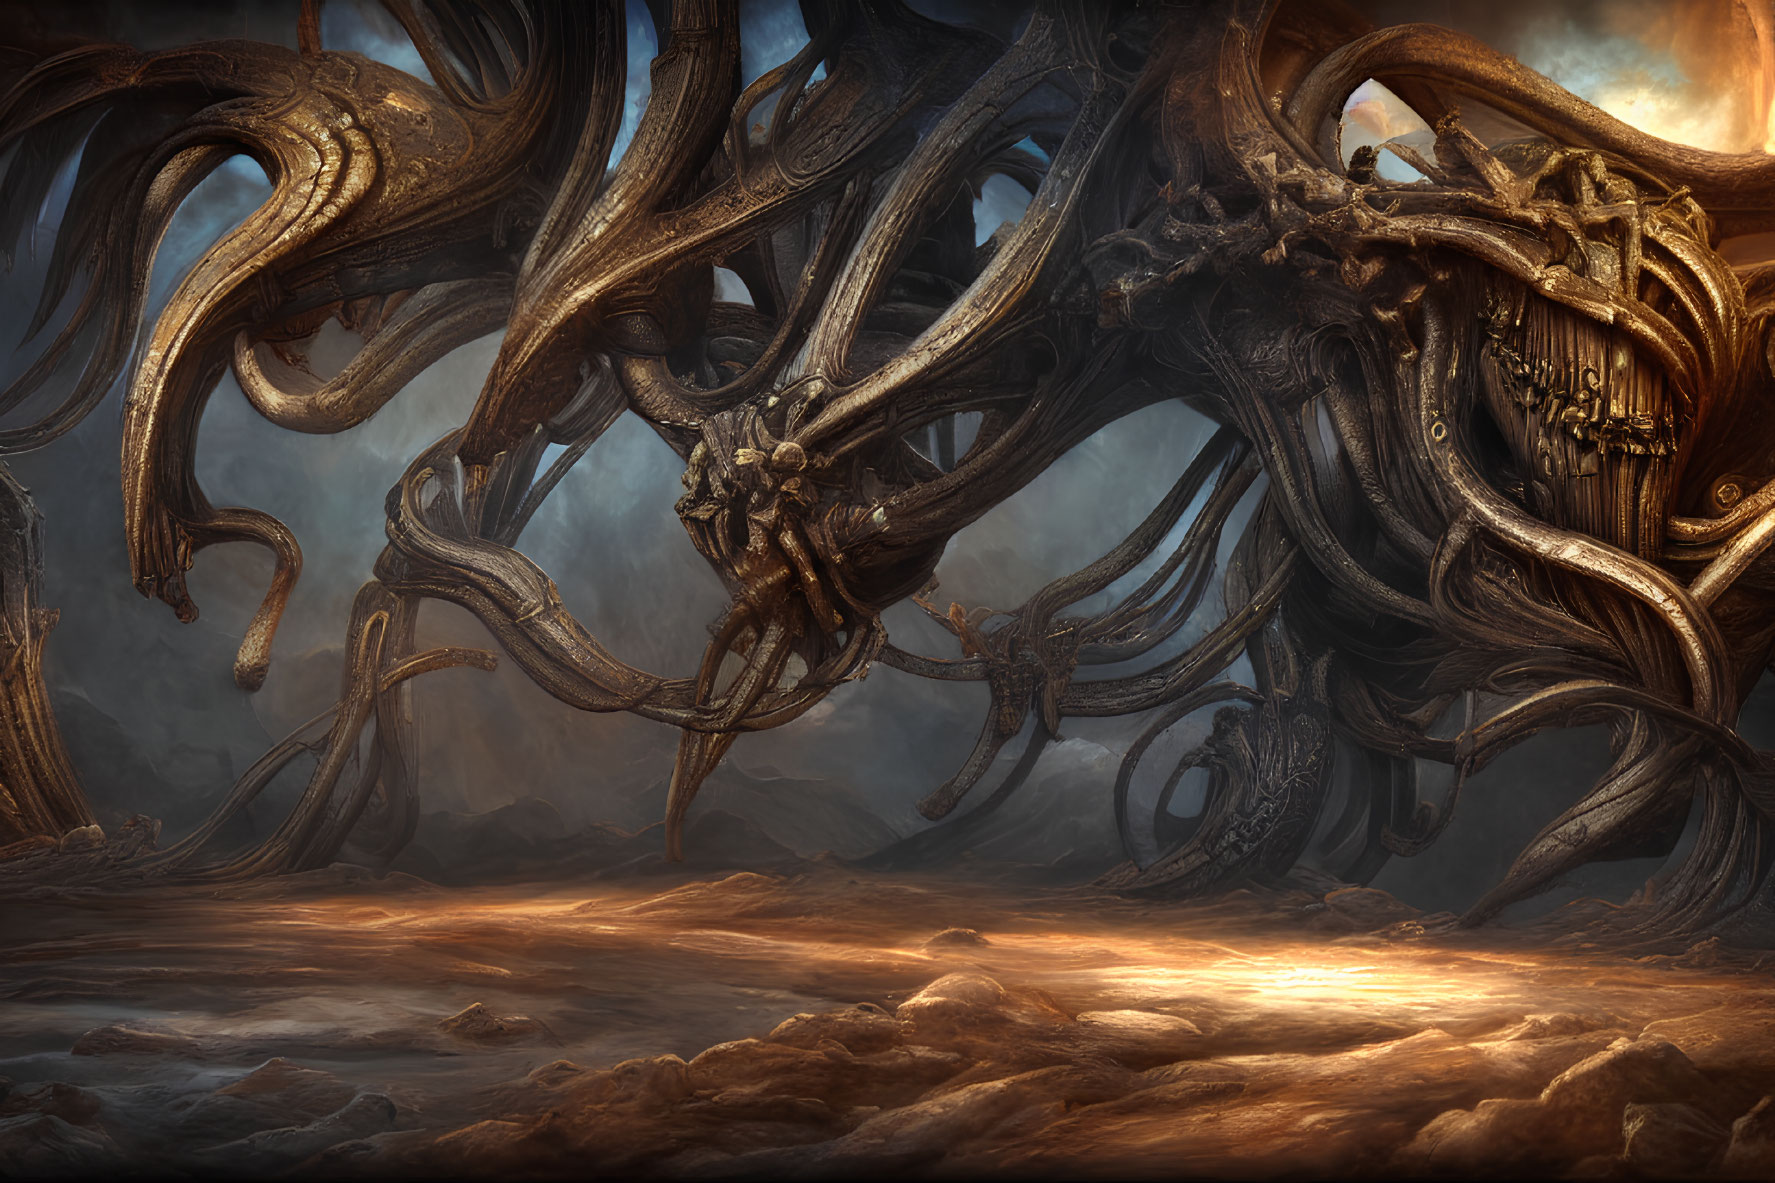 Surreal dark landscape with twisted root-like structures and eerie orange lighting